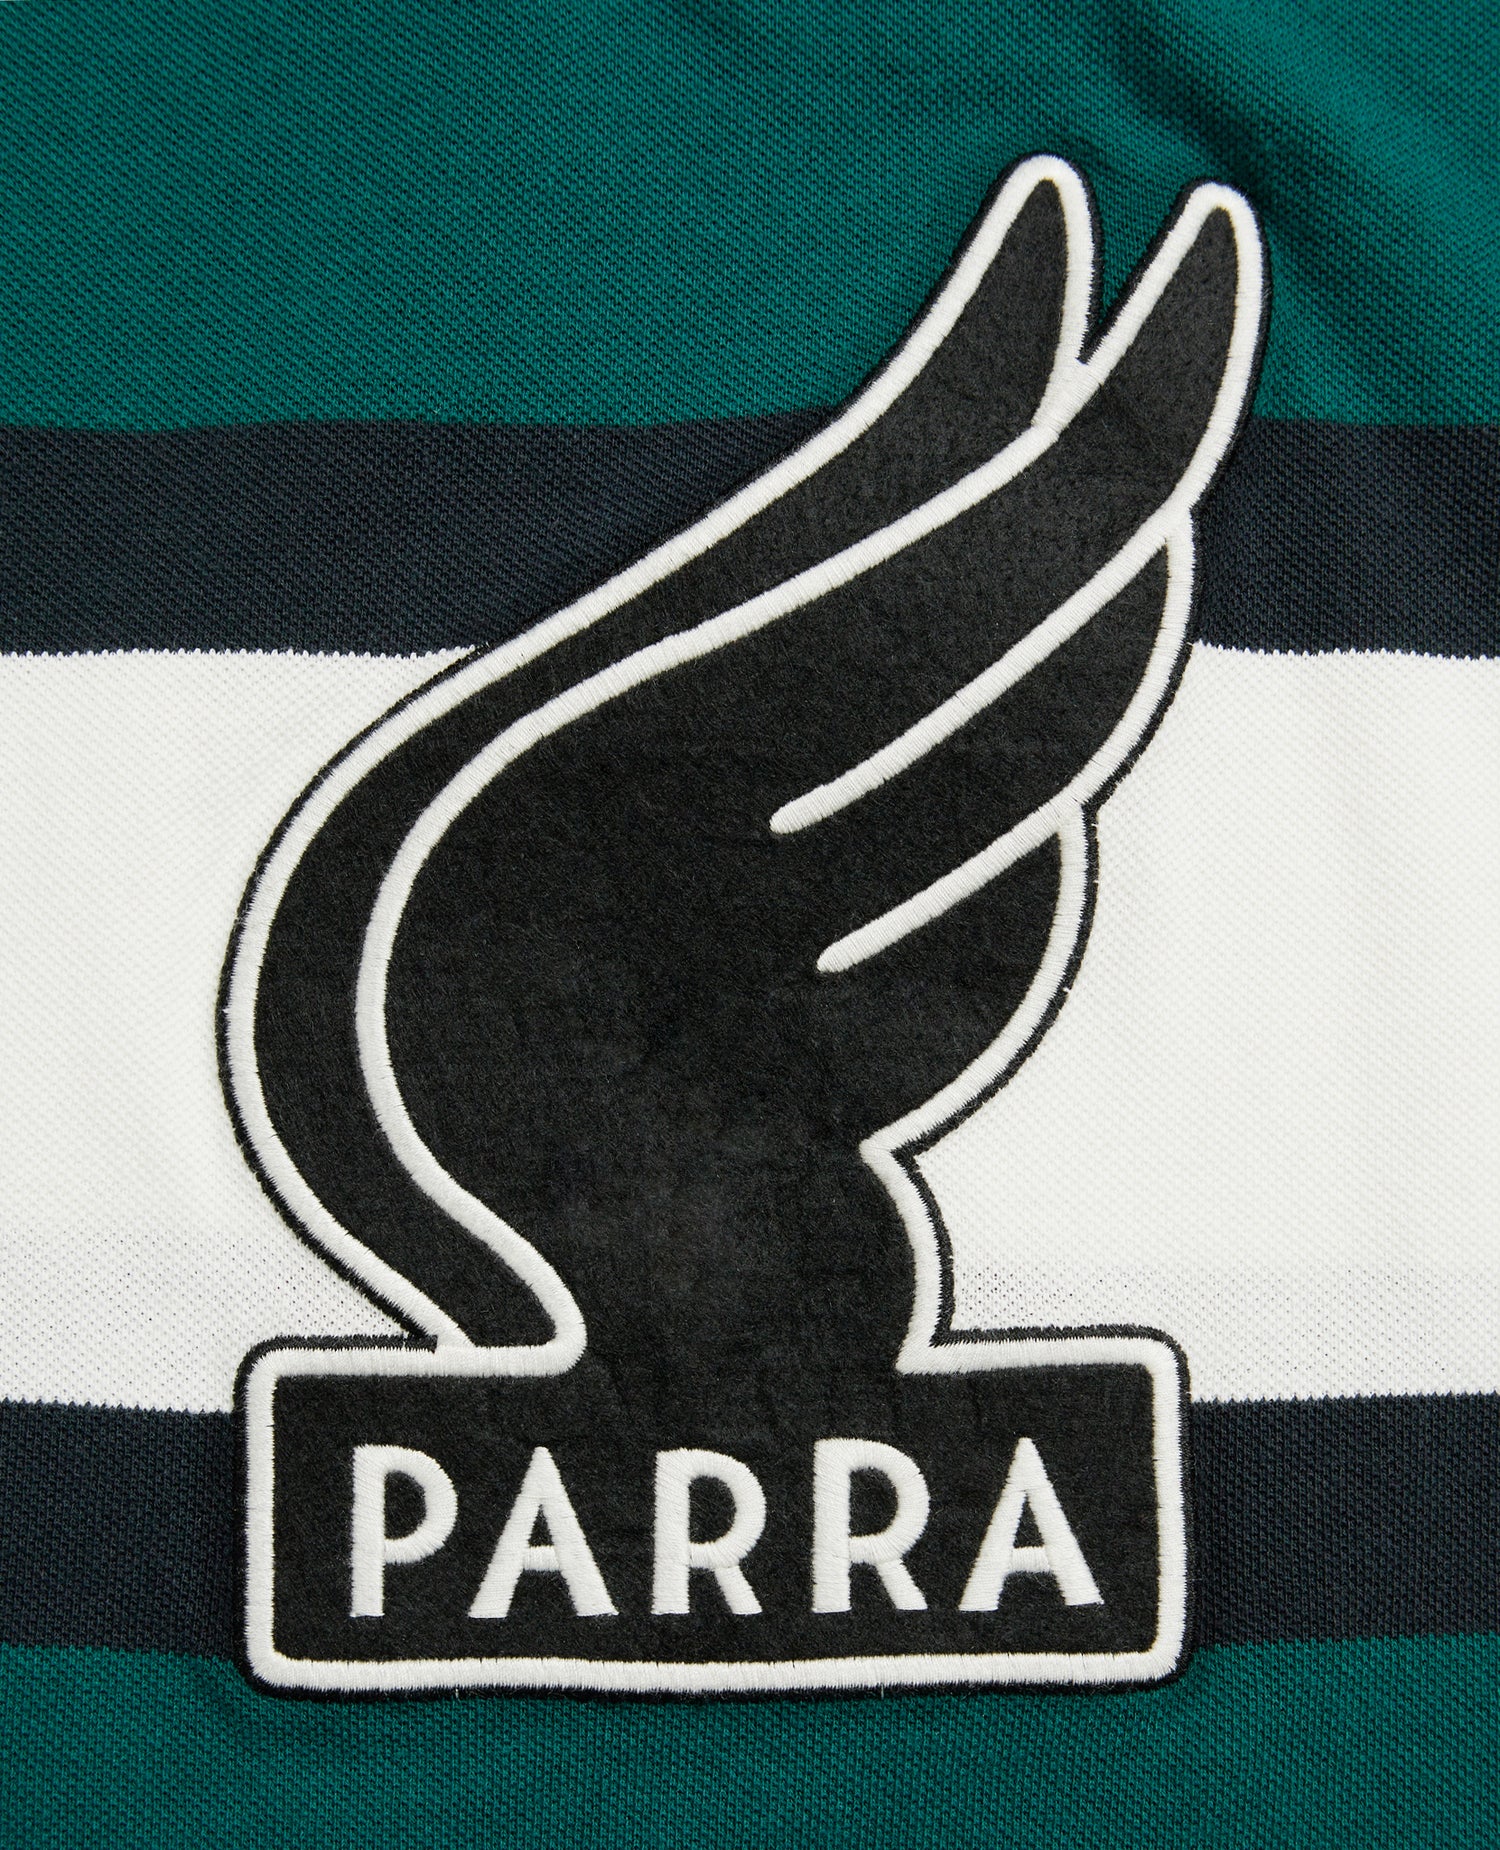 byParra Winged Logo Polo Shirt (Teal/Off White)